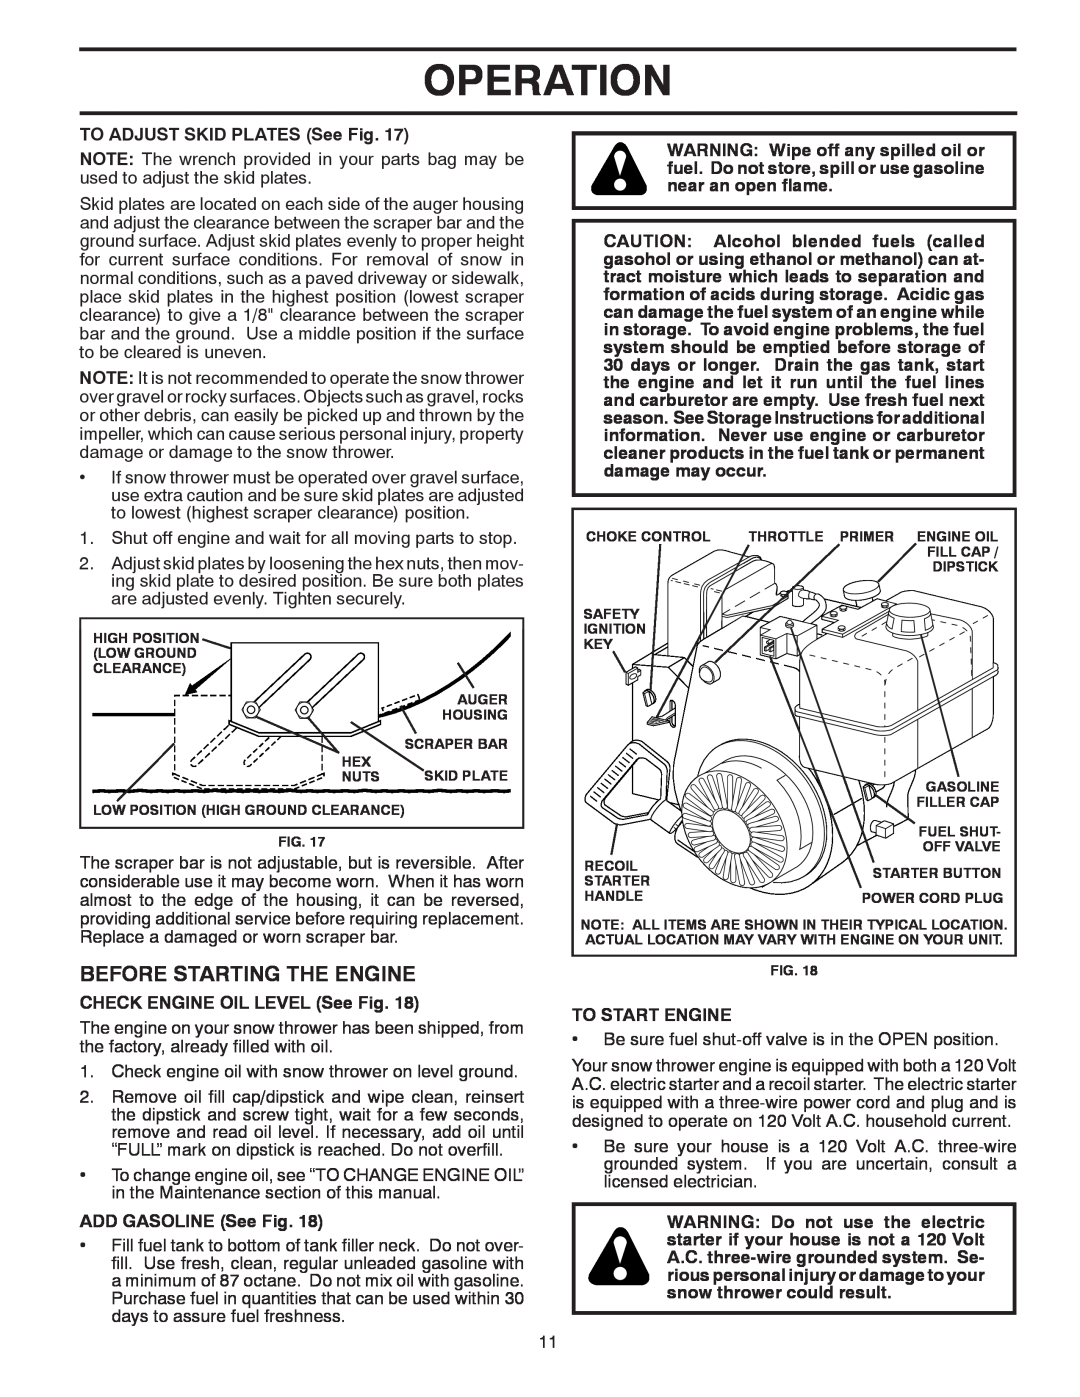 Poulan 416829 Operation, Before Starting The Engine, Scraper Bar, CHECK ENGINE OIL LEVEL See Fig, ADD GASOLINE See Fig 